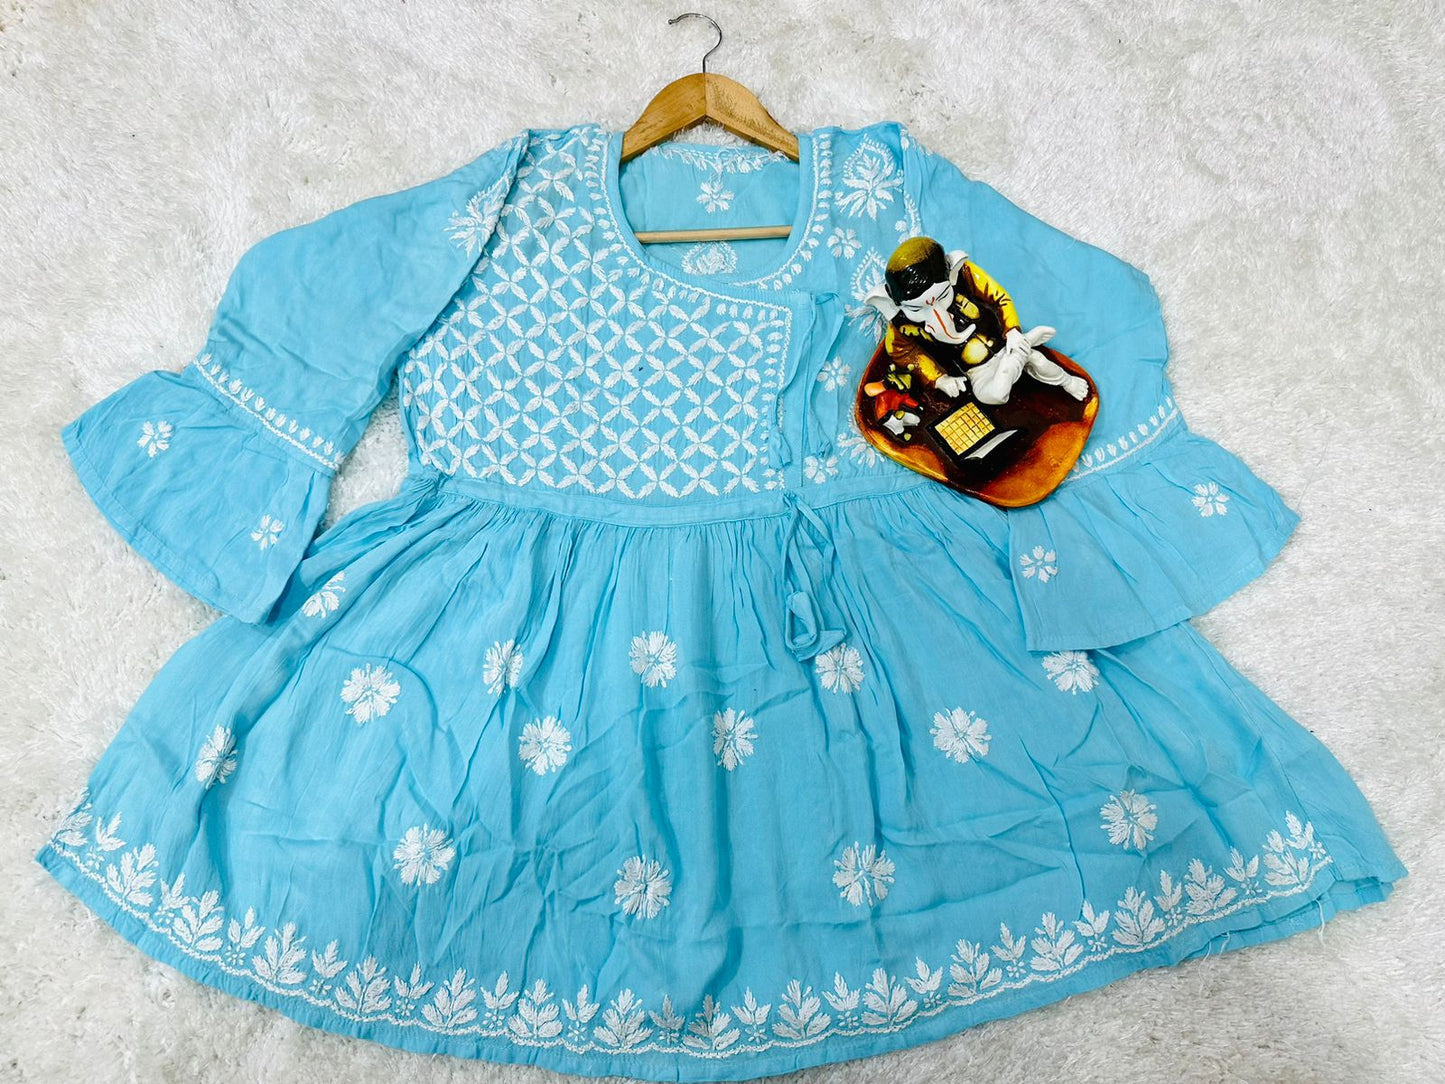 Blue Short Chikankari Kurti Lucknowi Hand embroidered Angrakha Frock with Bell Sleeves Embroidered on front and back